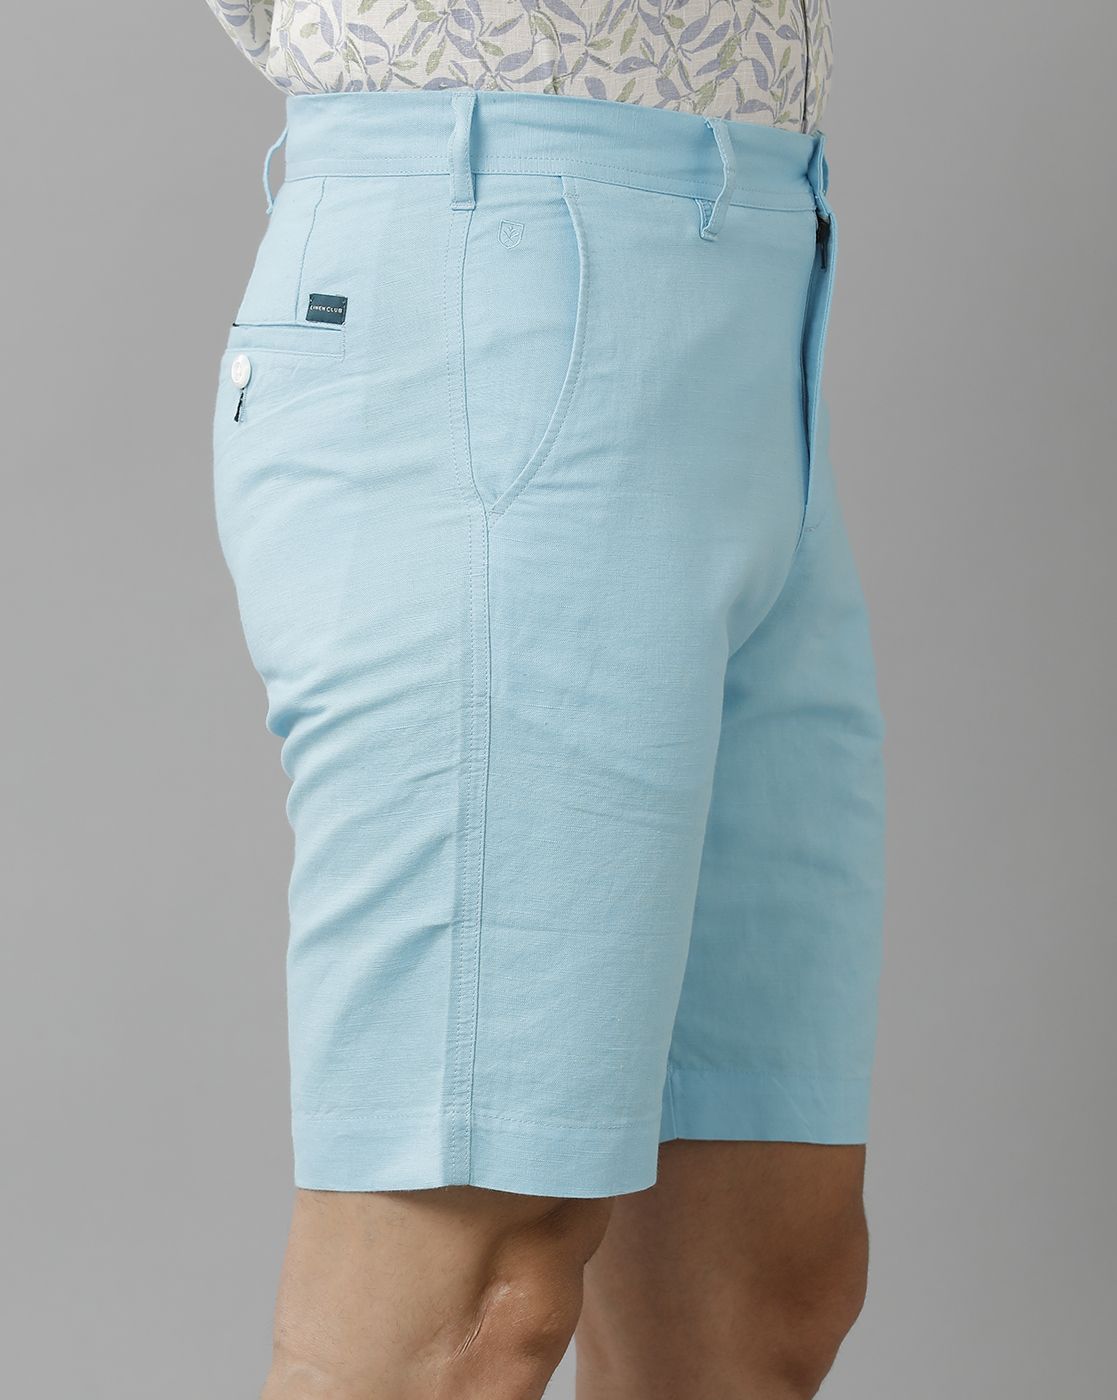 Blue Solid Color Flax Shorts